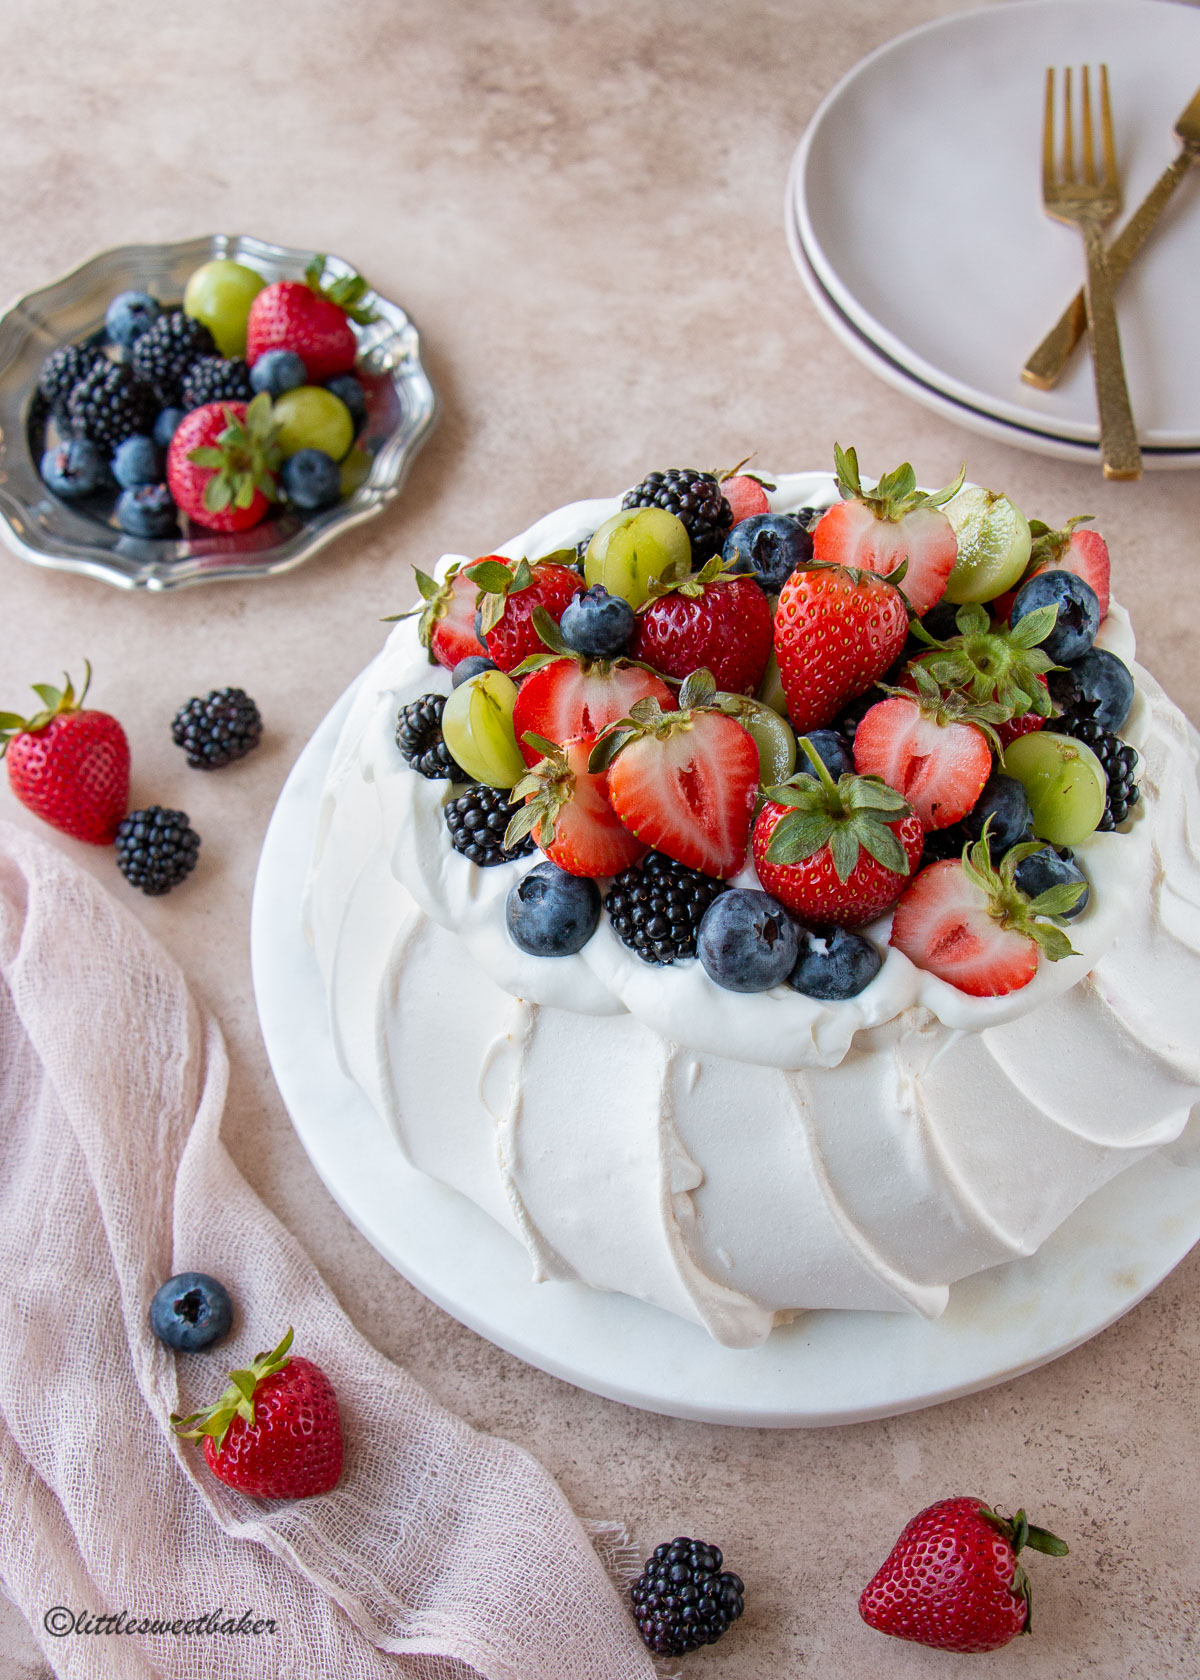 A pavlova topped with fruit and whipped cream on a marble plate with a pink linen napkin and scattered fruits.